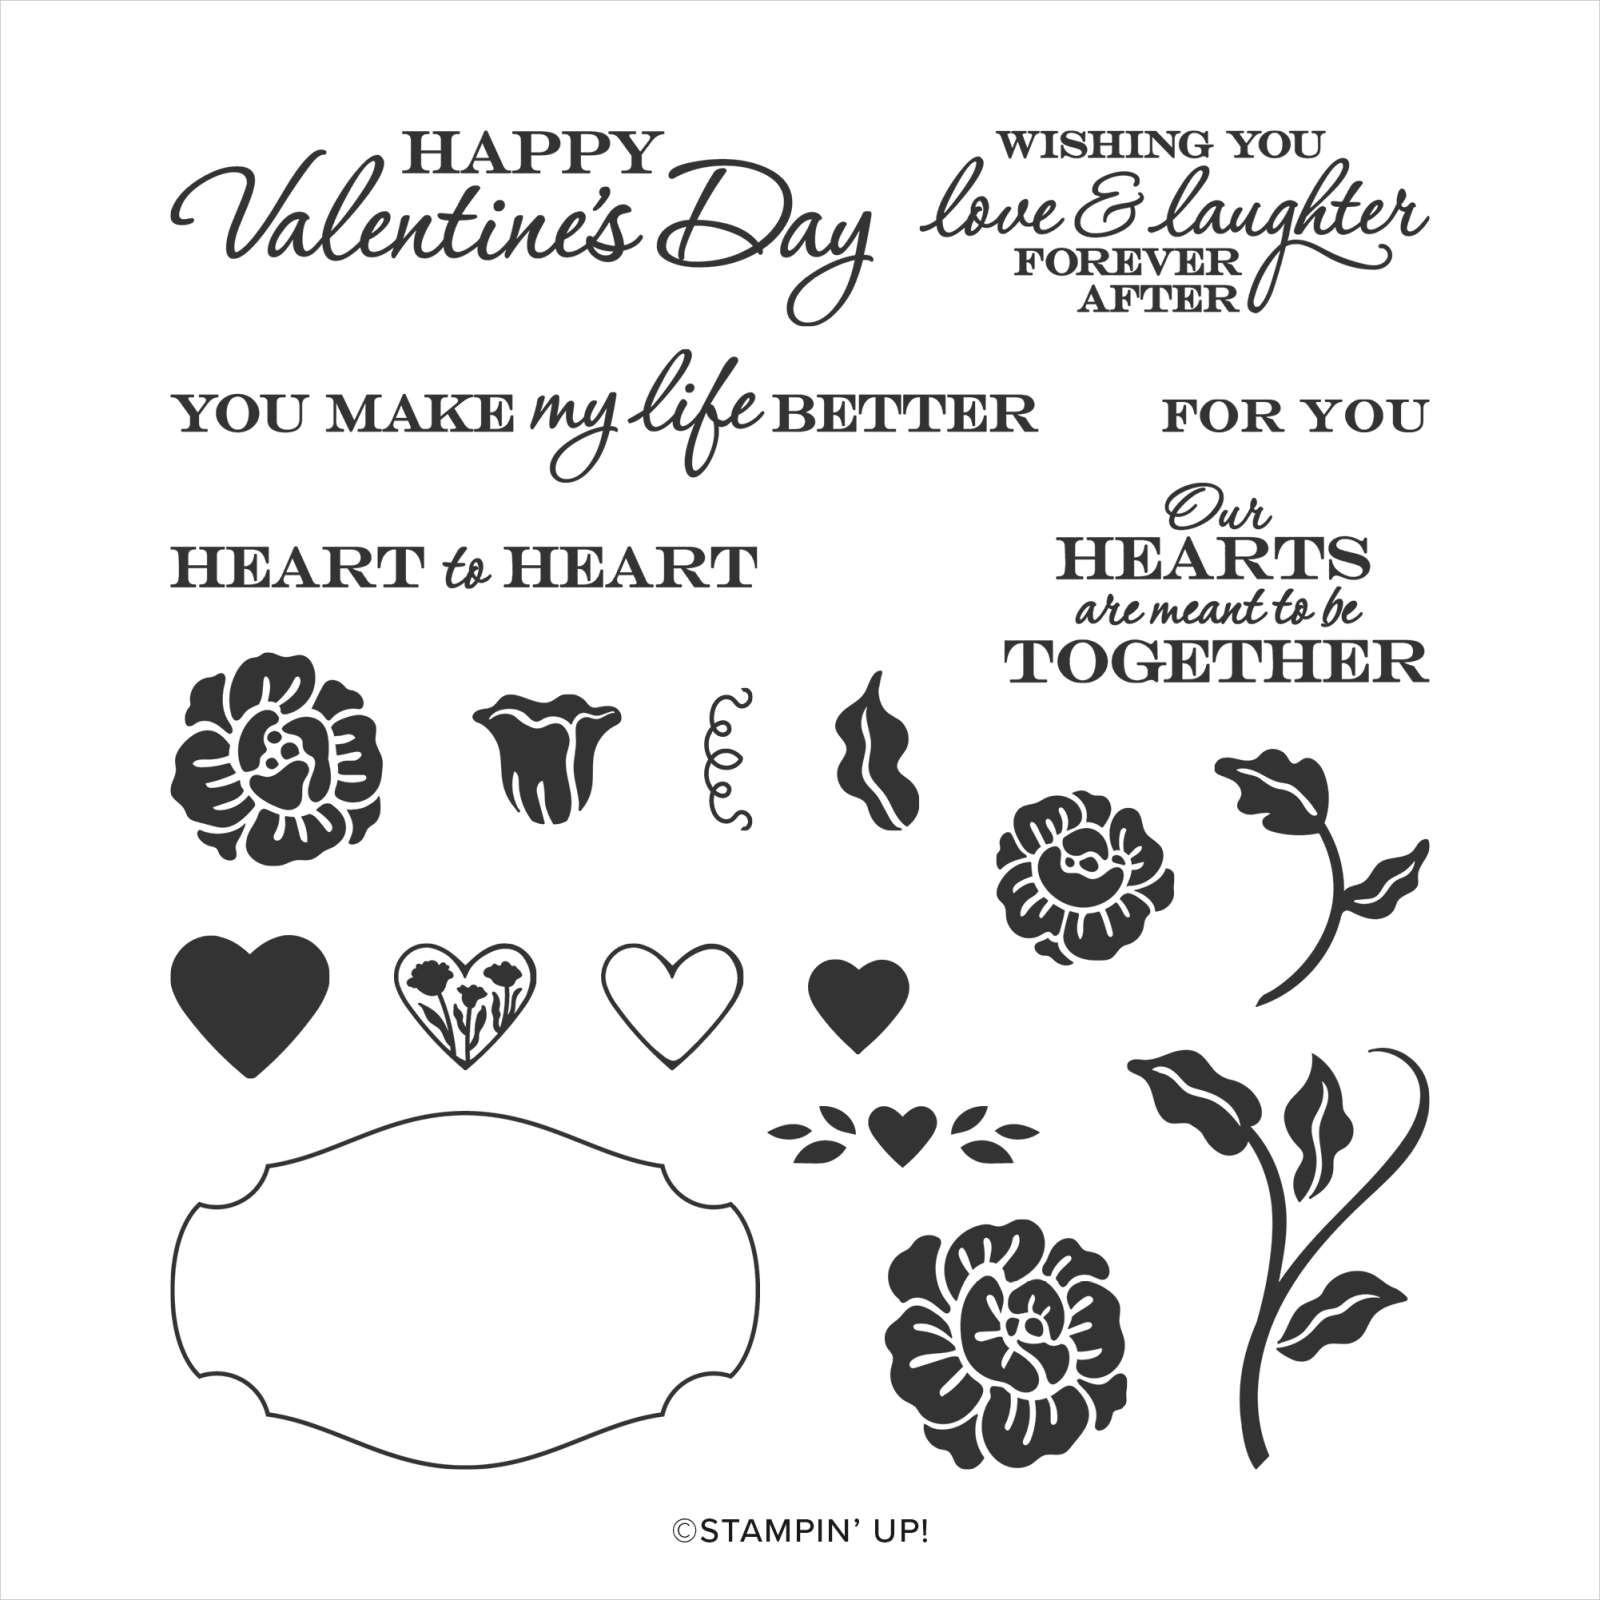 Heart to Heart, Retired Photopolymer Stamp Set